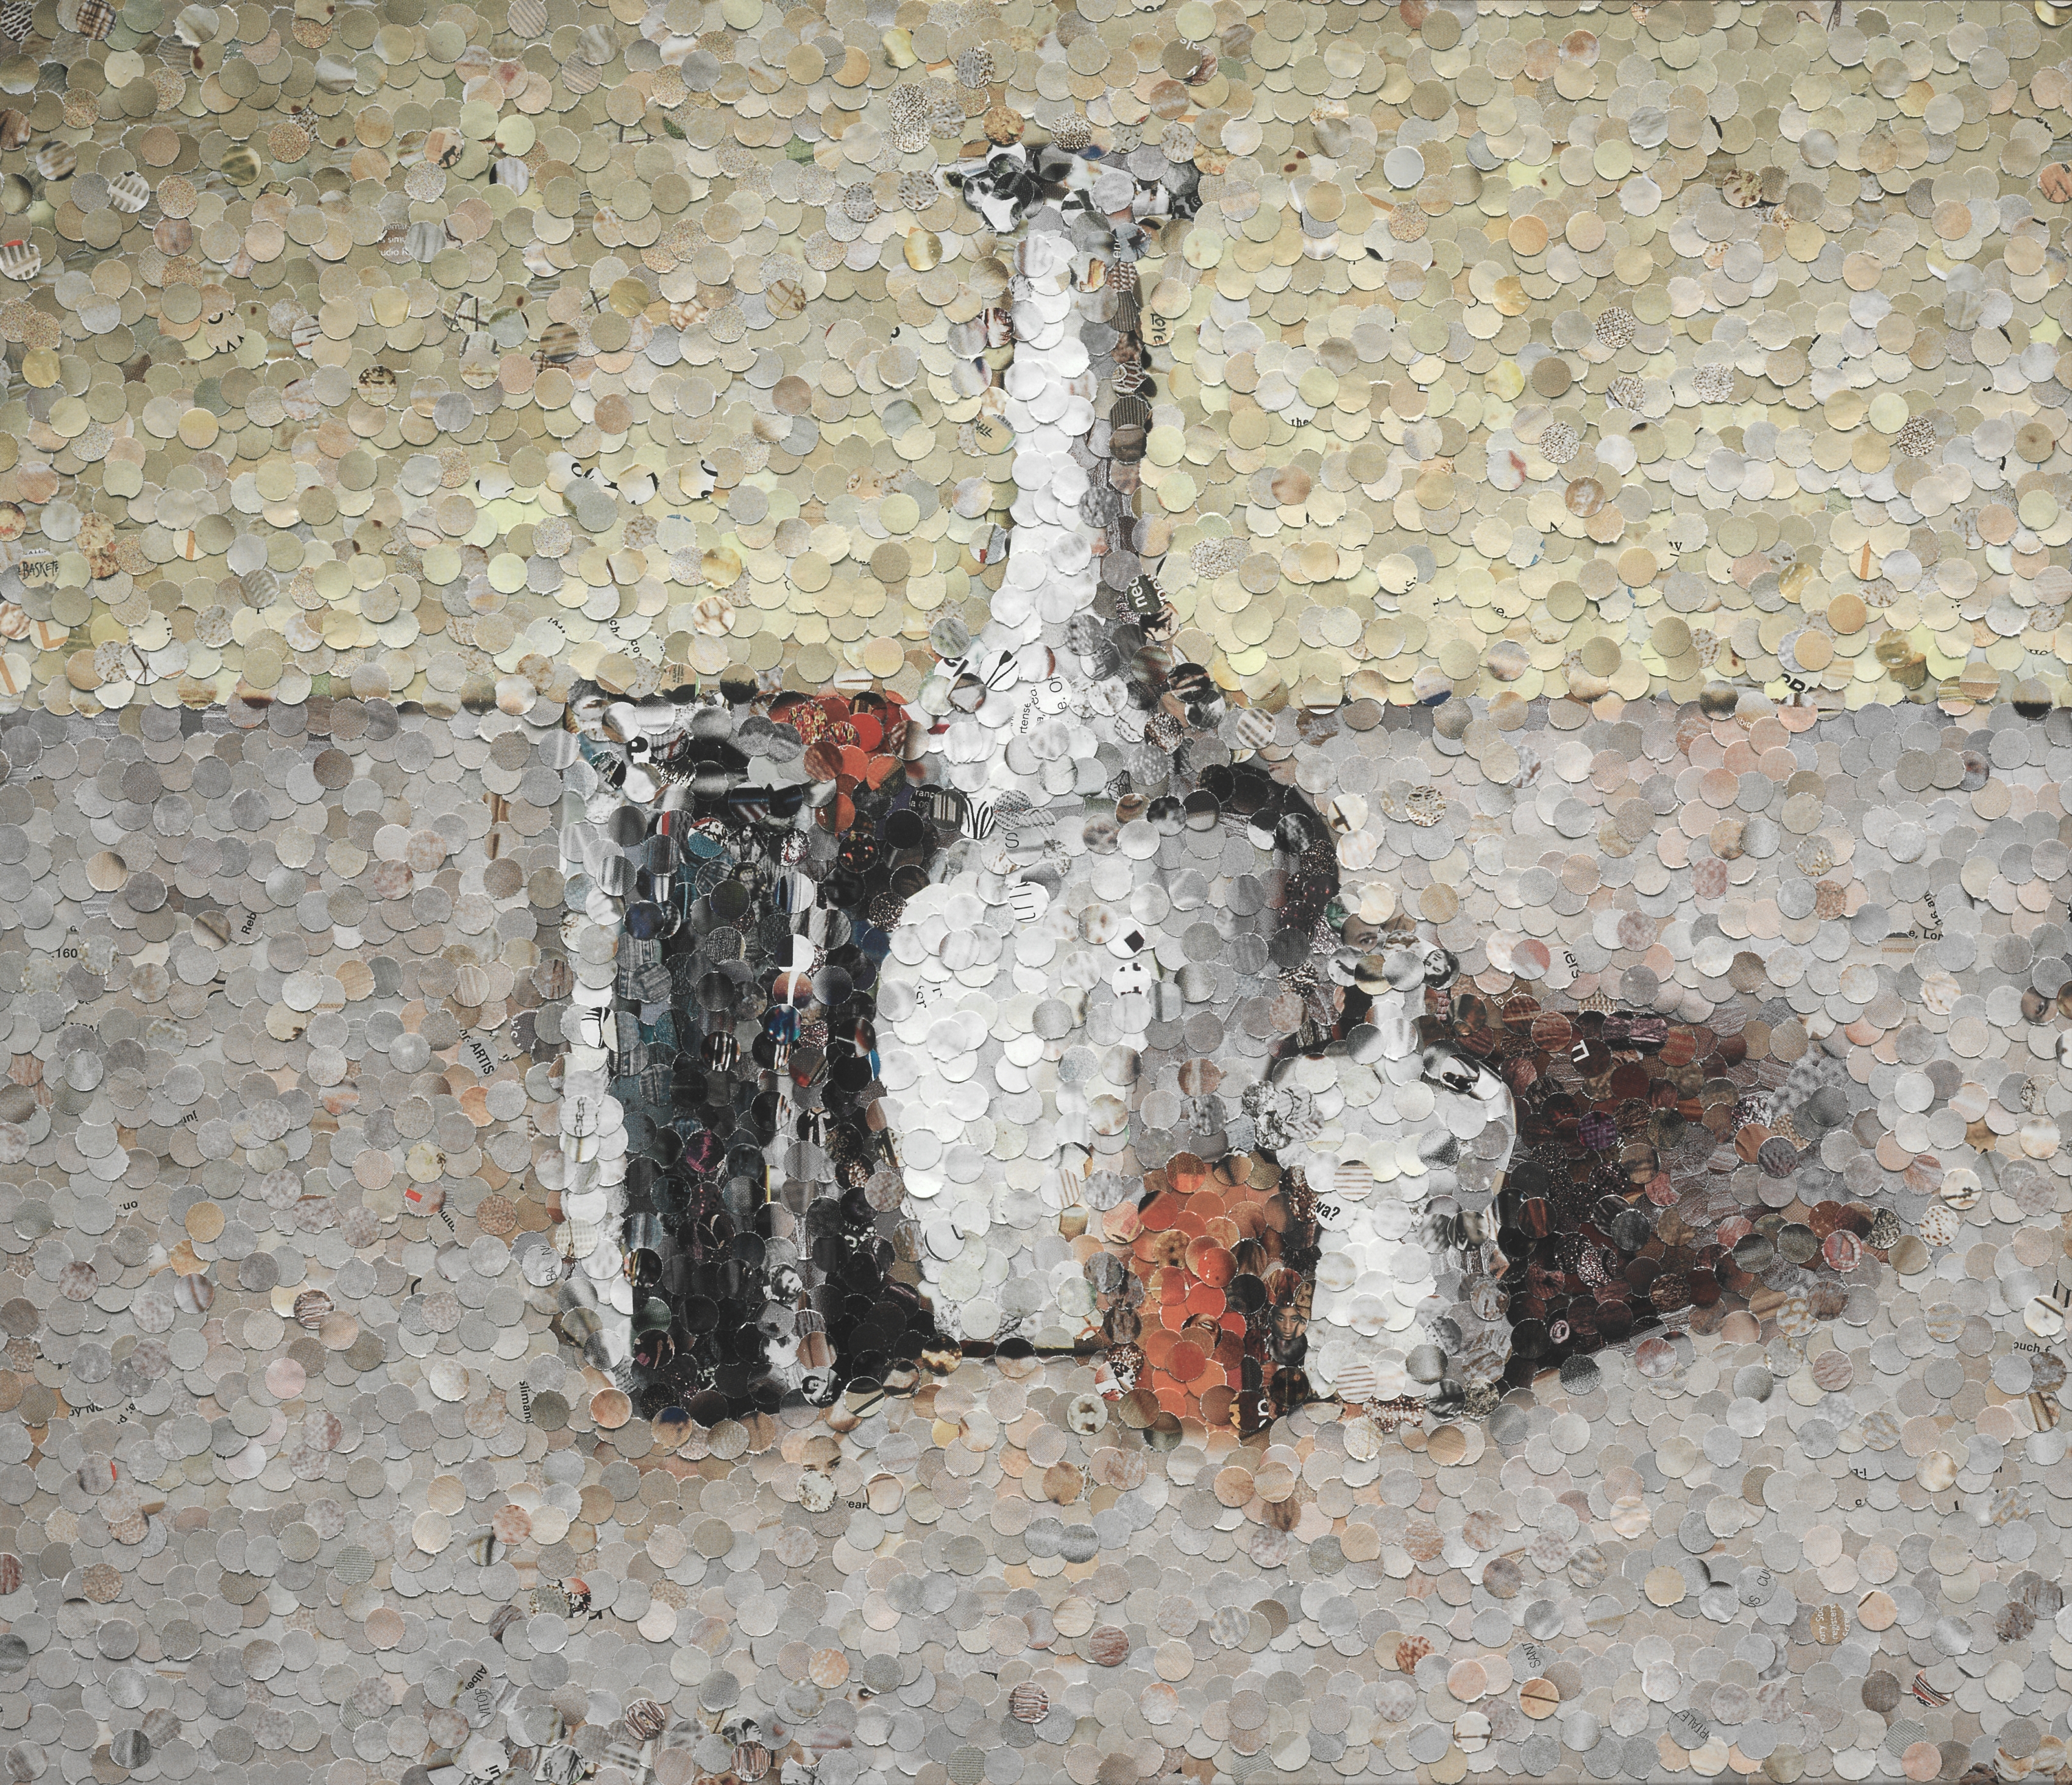 Still Life after Morandi (from Pictures of Magazines)